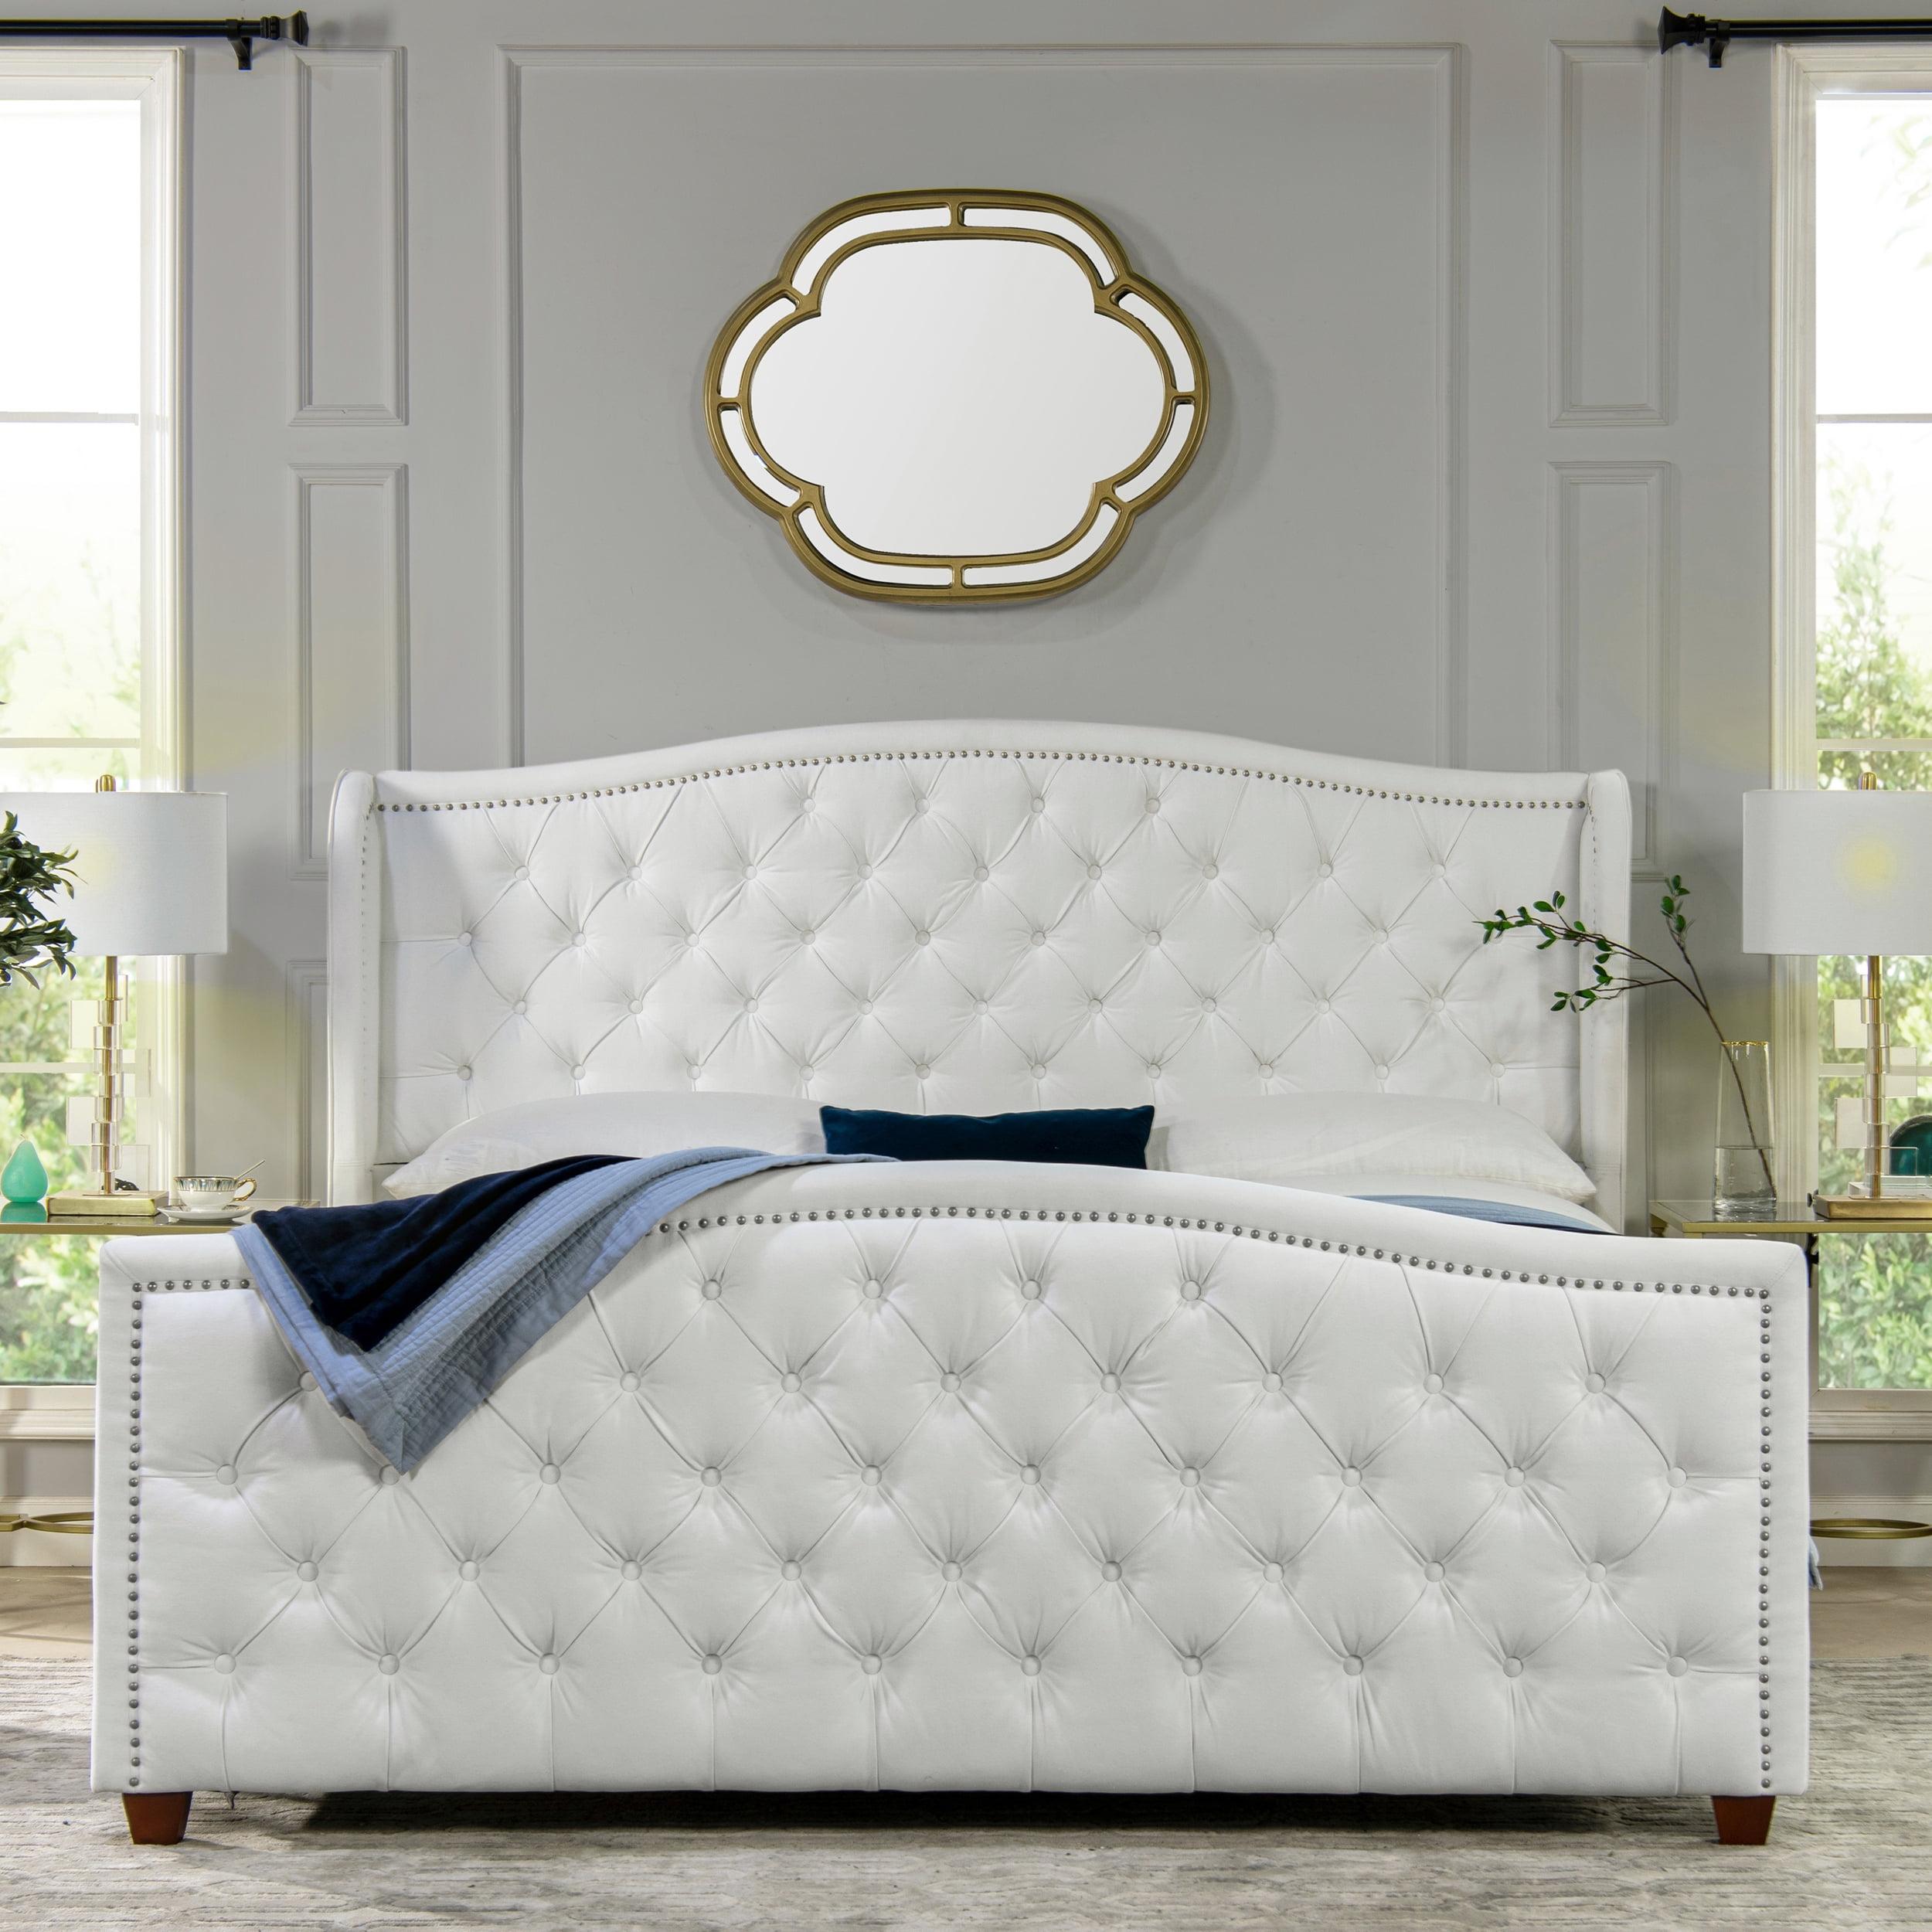 Elegant King-Sized Birch Wood Frame Bed with Tufted Polyester Upholstery